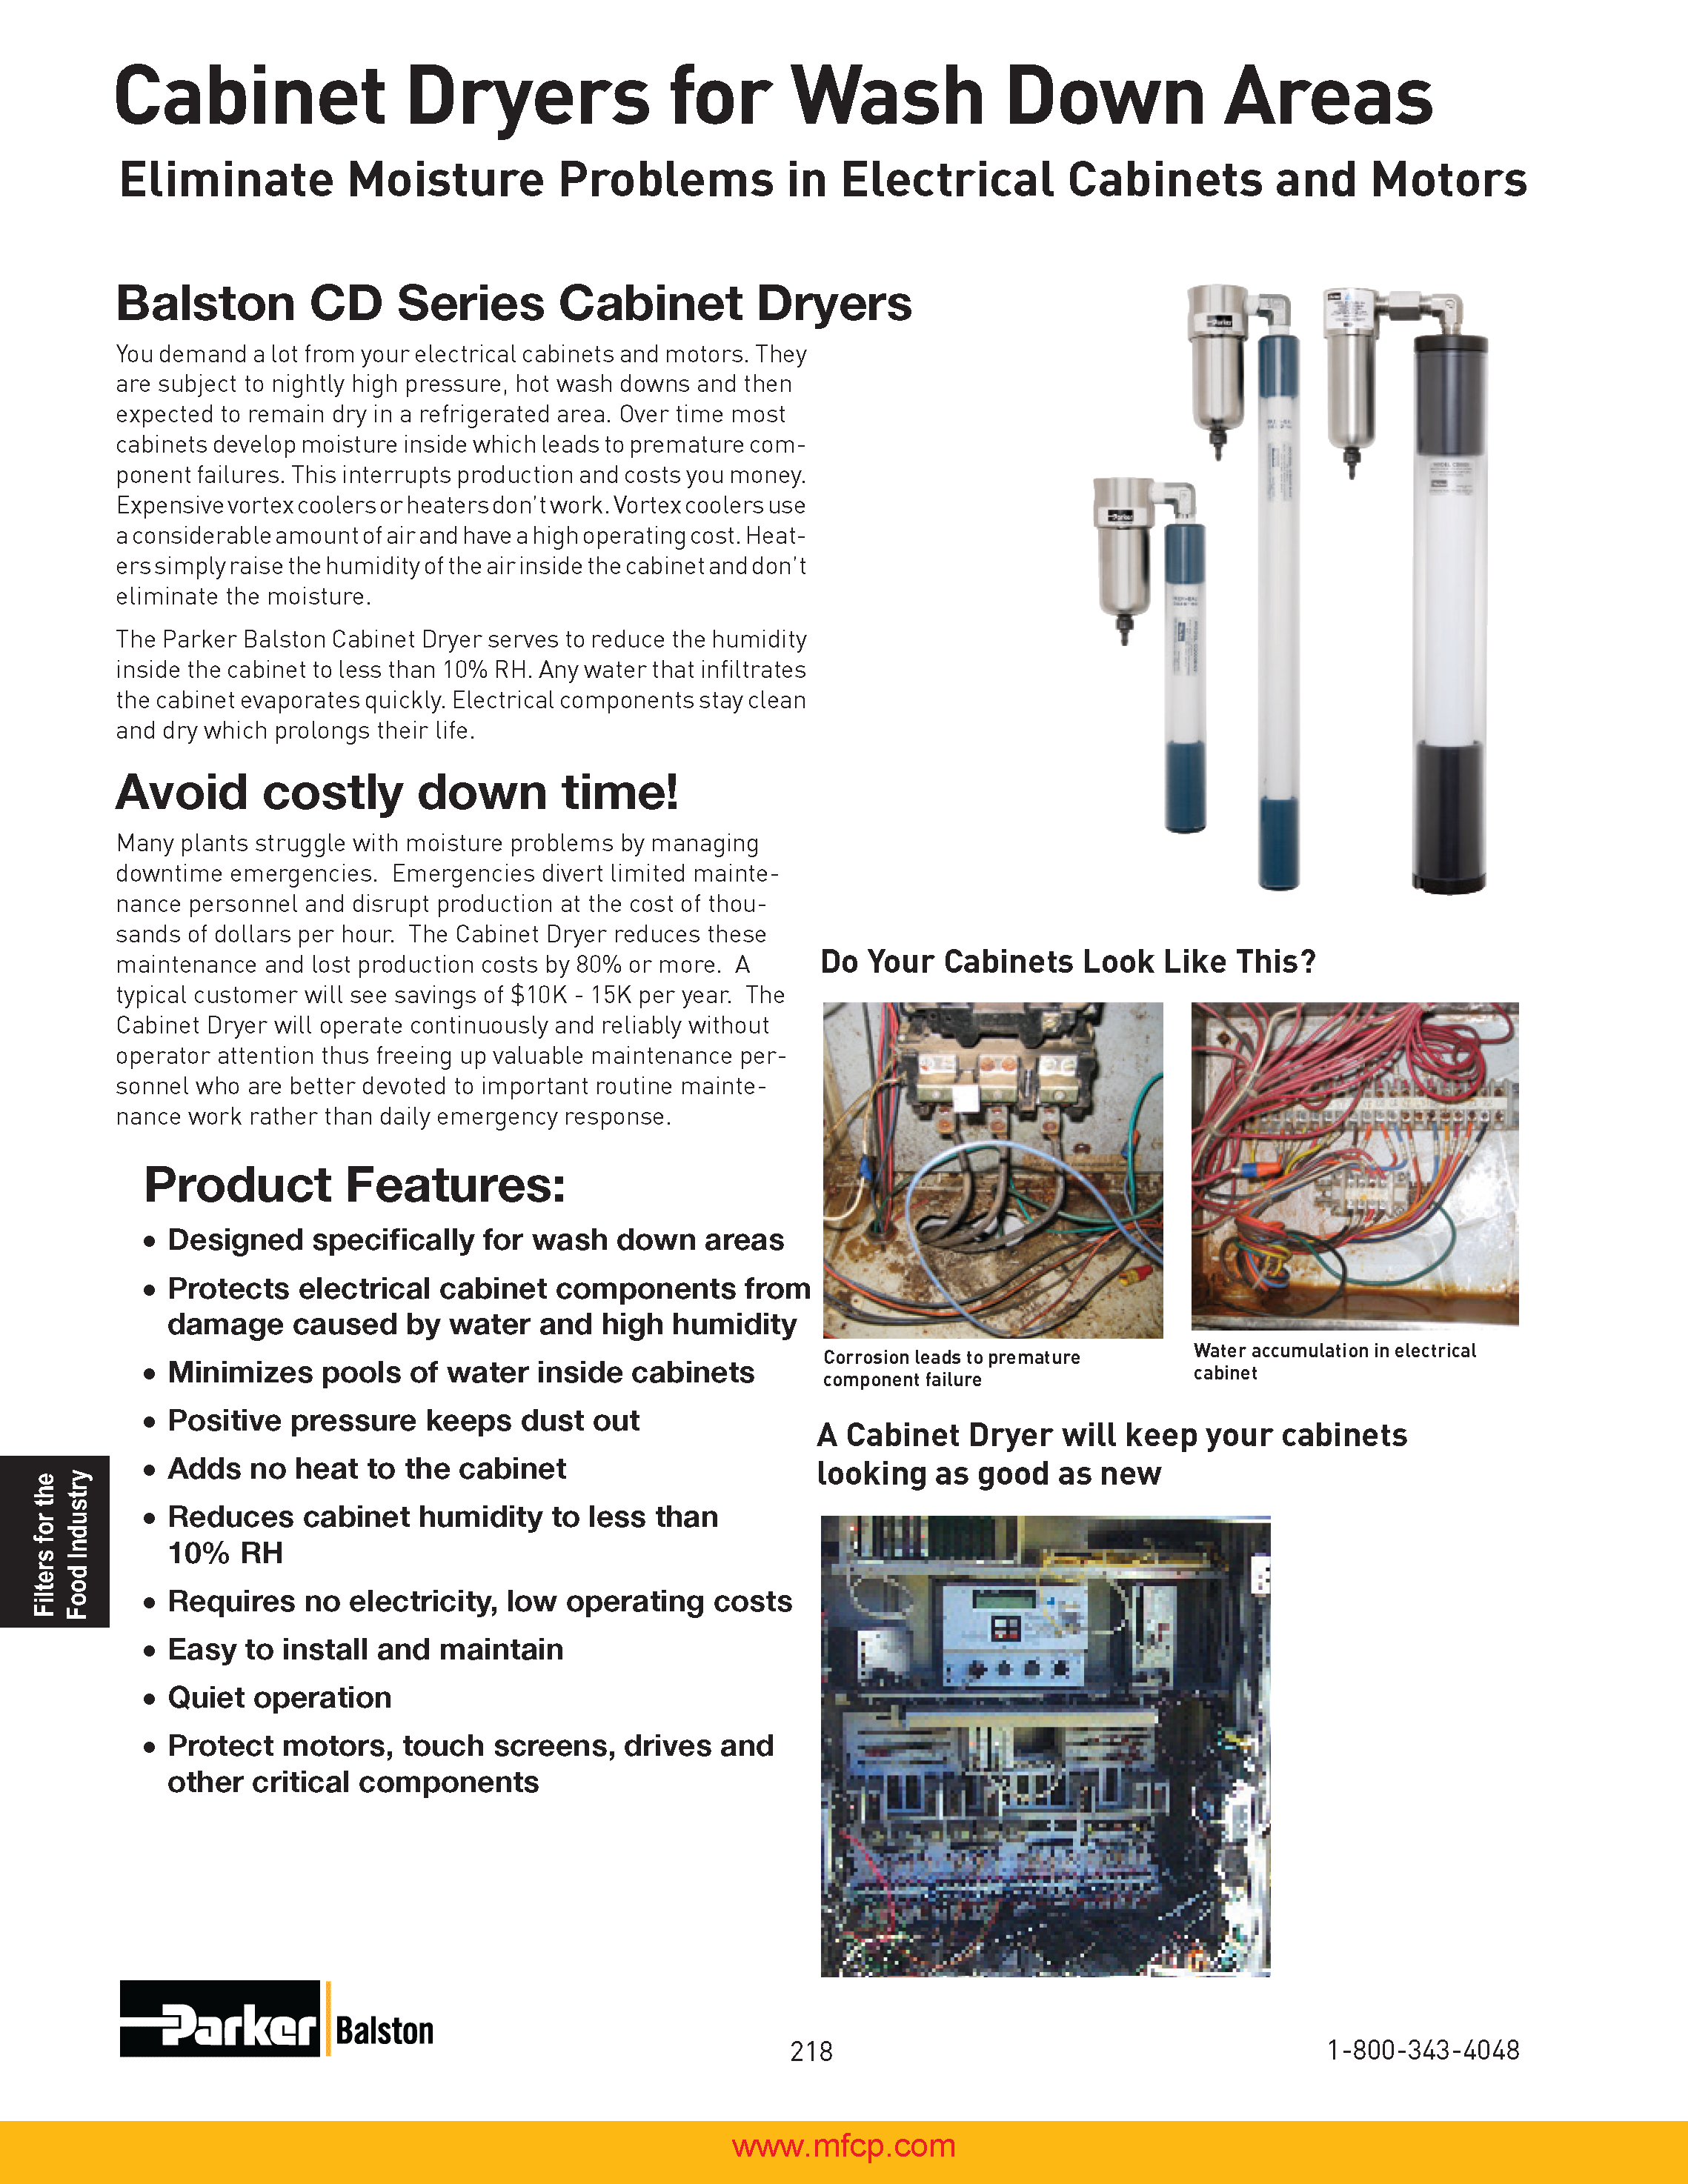 Parker Balston Compressed Air Dryers for Electrical Cabinets